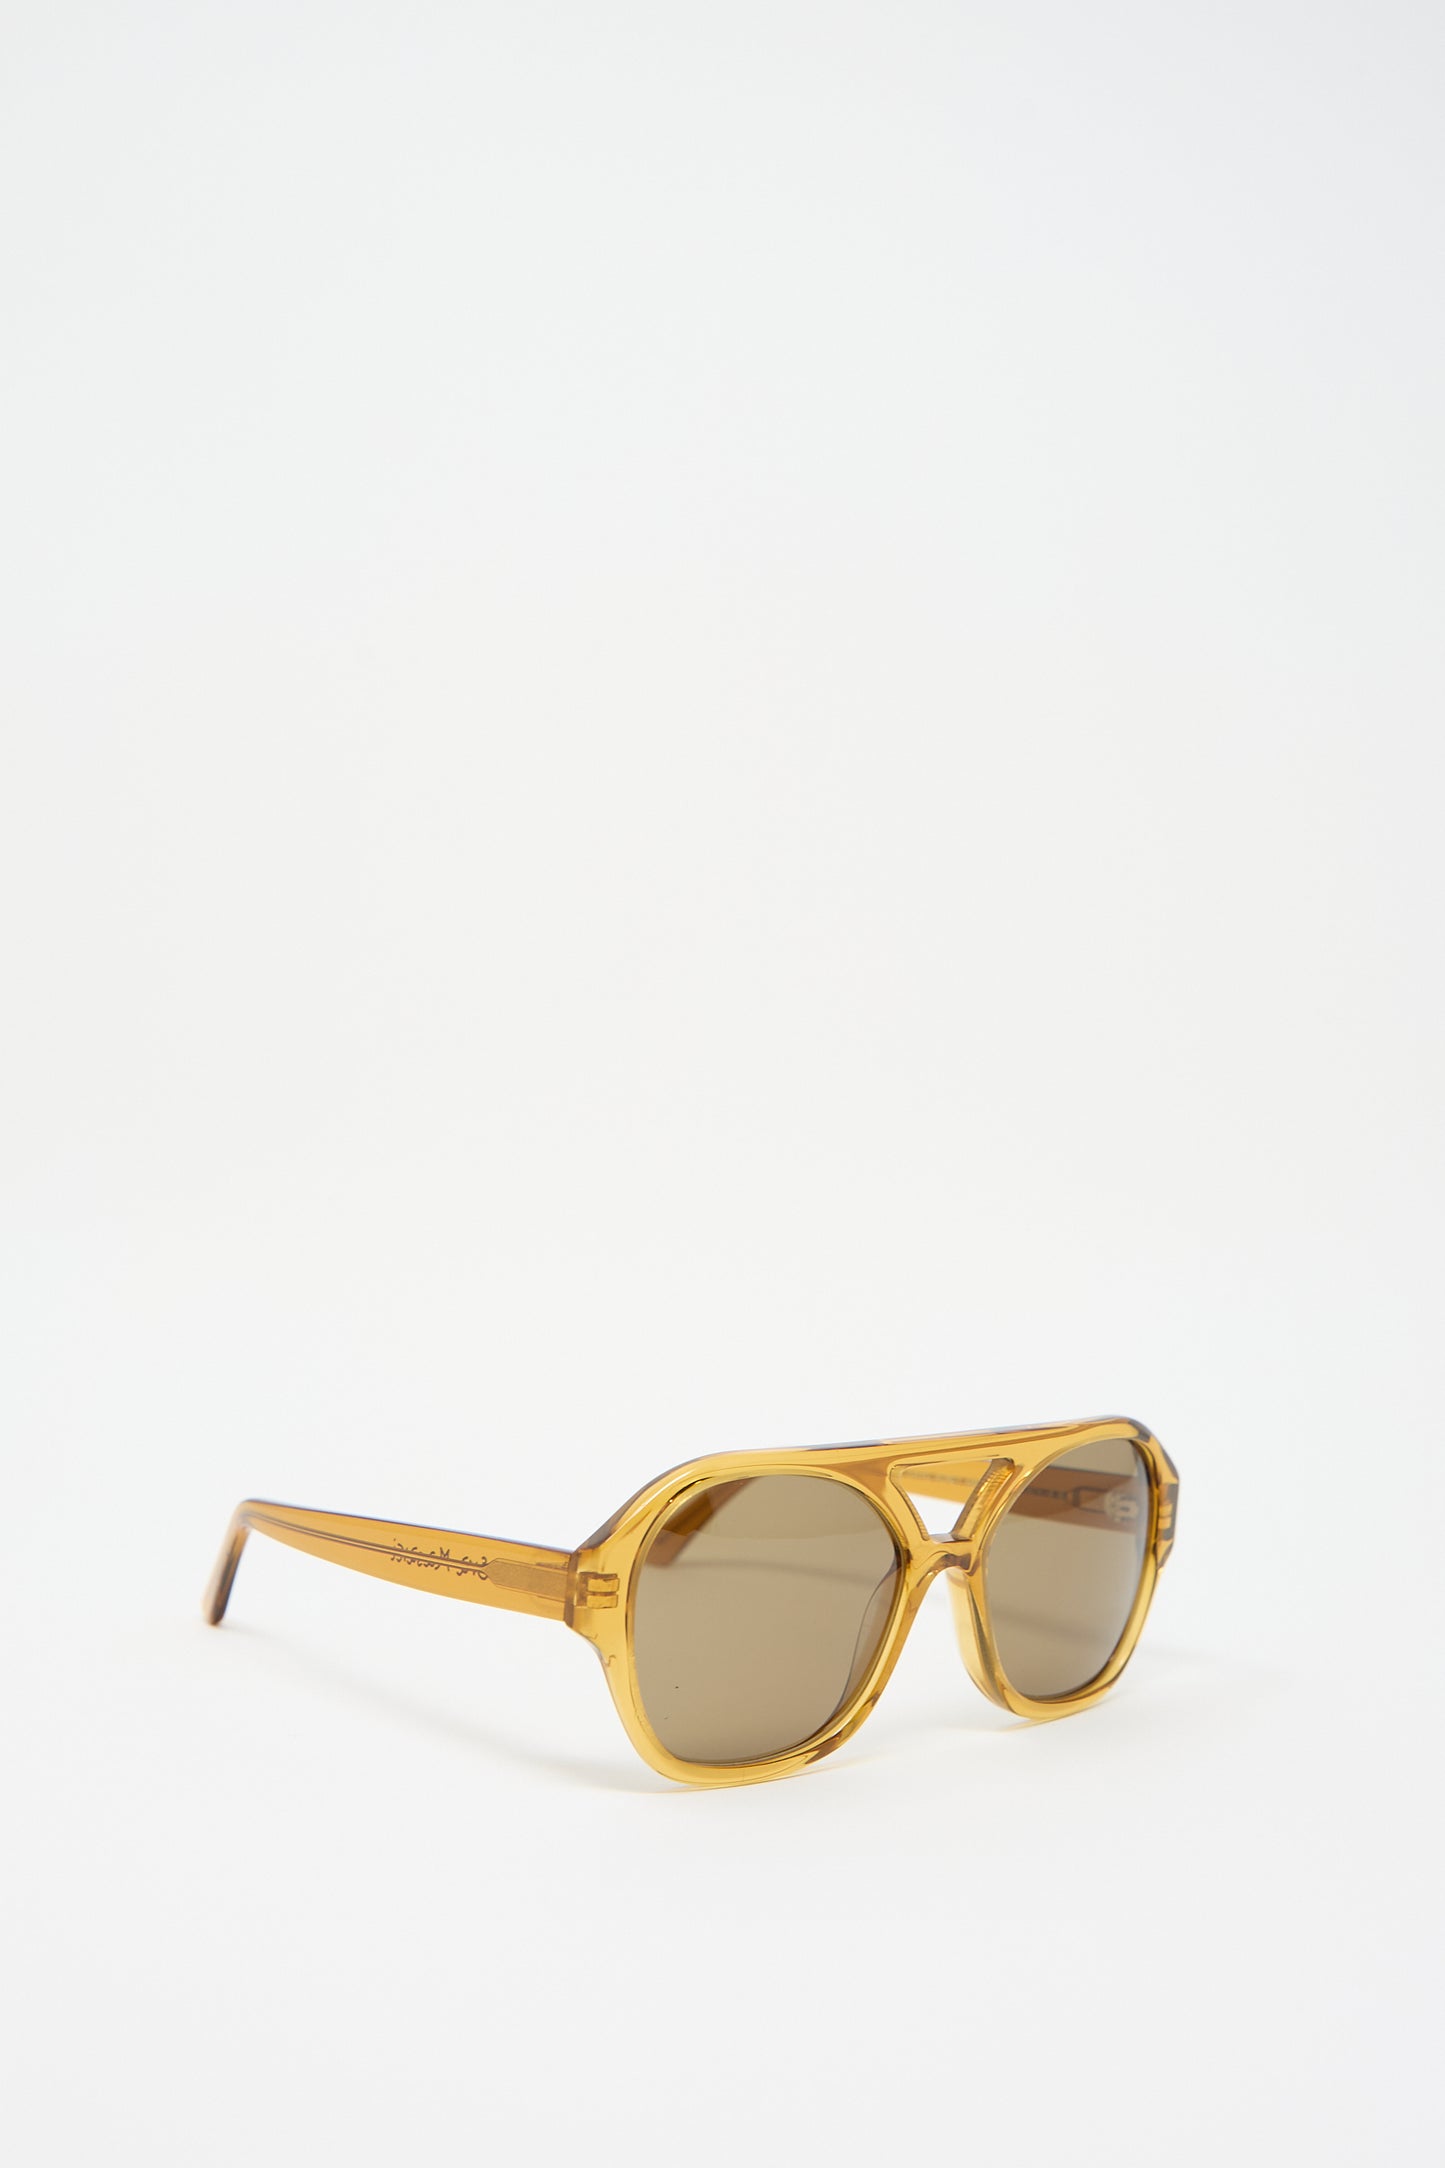 A pair of Chiyo Aviator Sunglasses in Honey by Eva Masaki with dark lenses, crafted from Italian acetate, is displayed against a white background. These stylish shades not only offer a chic look but also provide superior UV protection for your eyes.